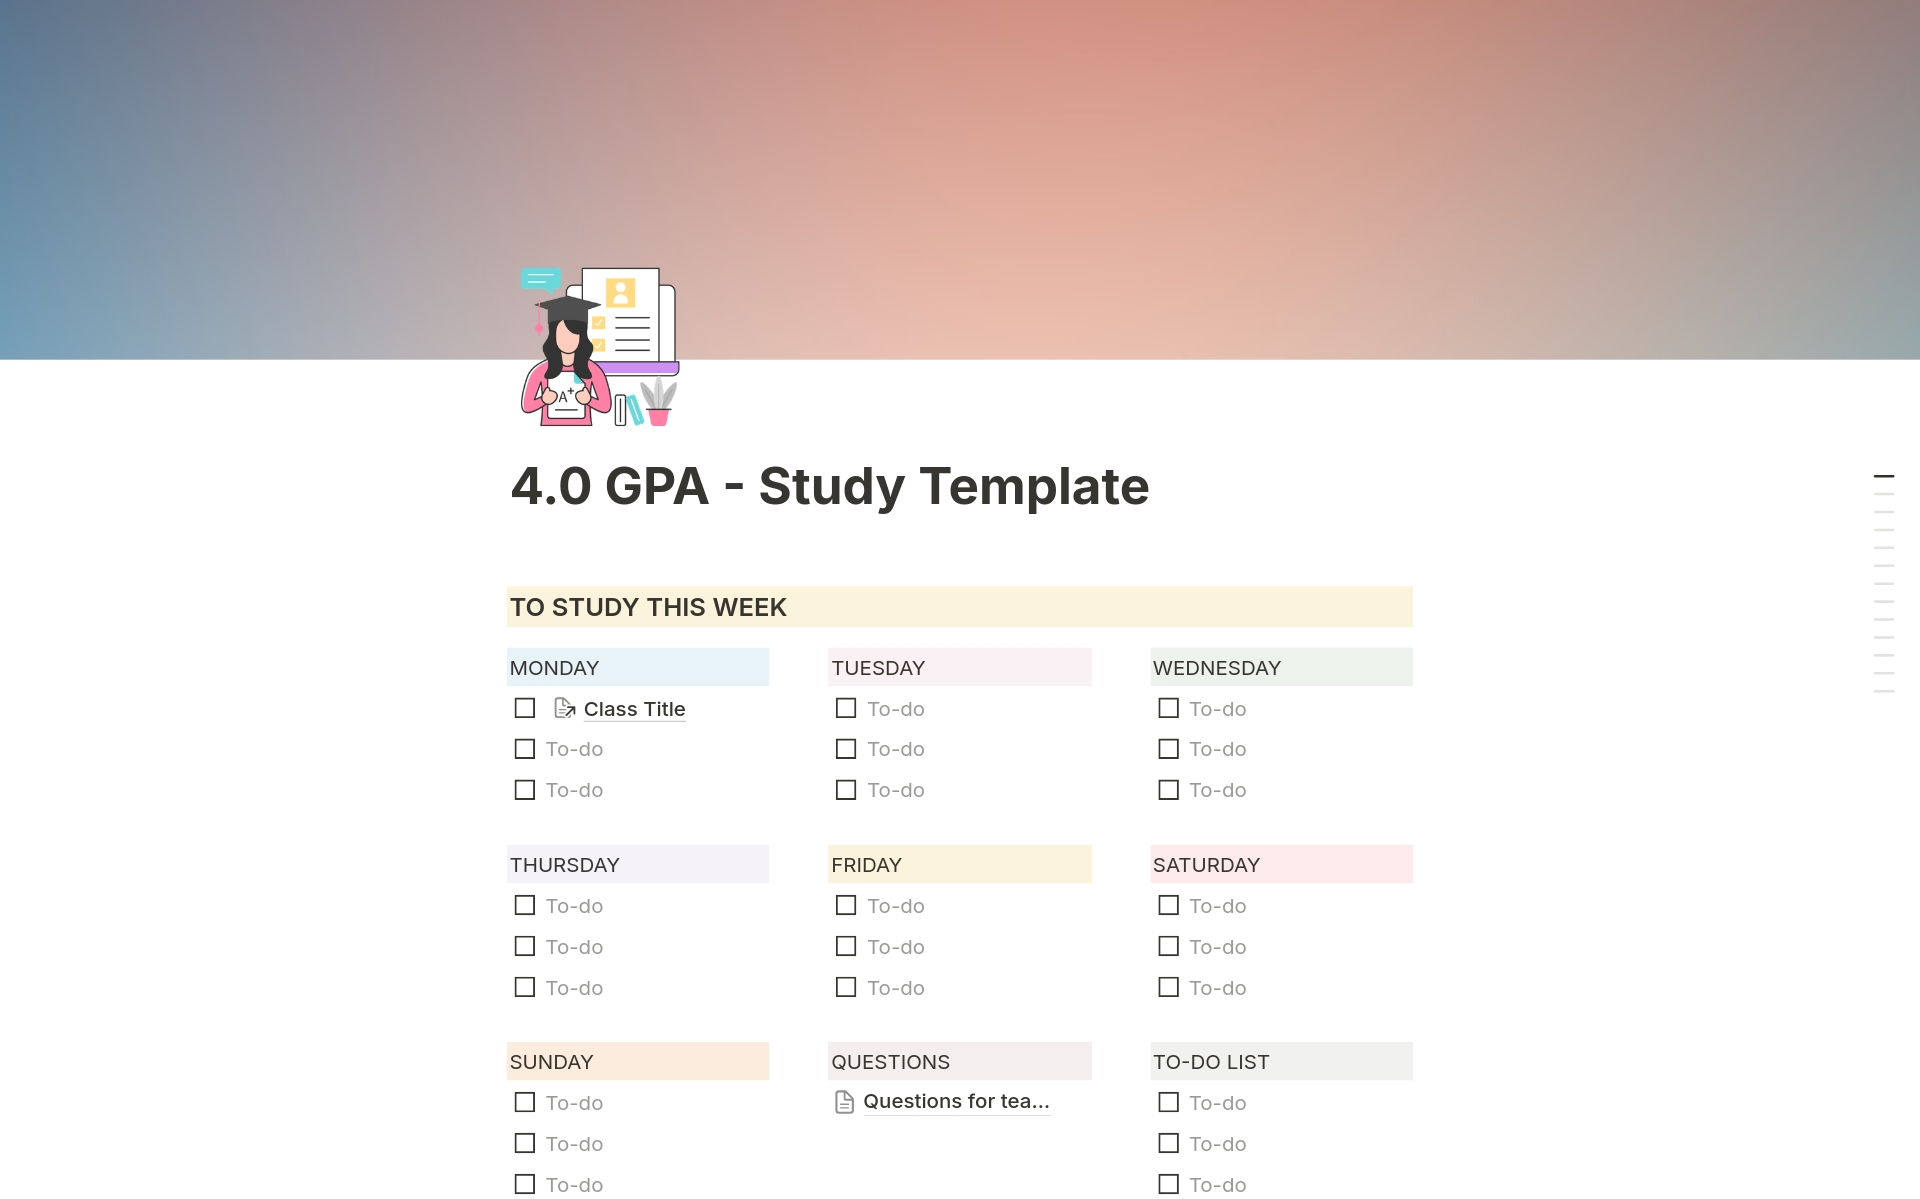 A template preview for 4.0 GPA - Study System